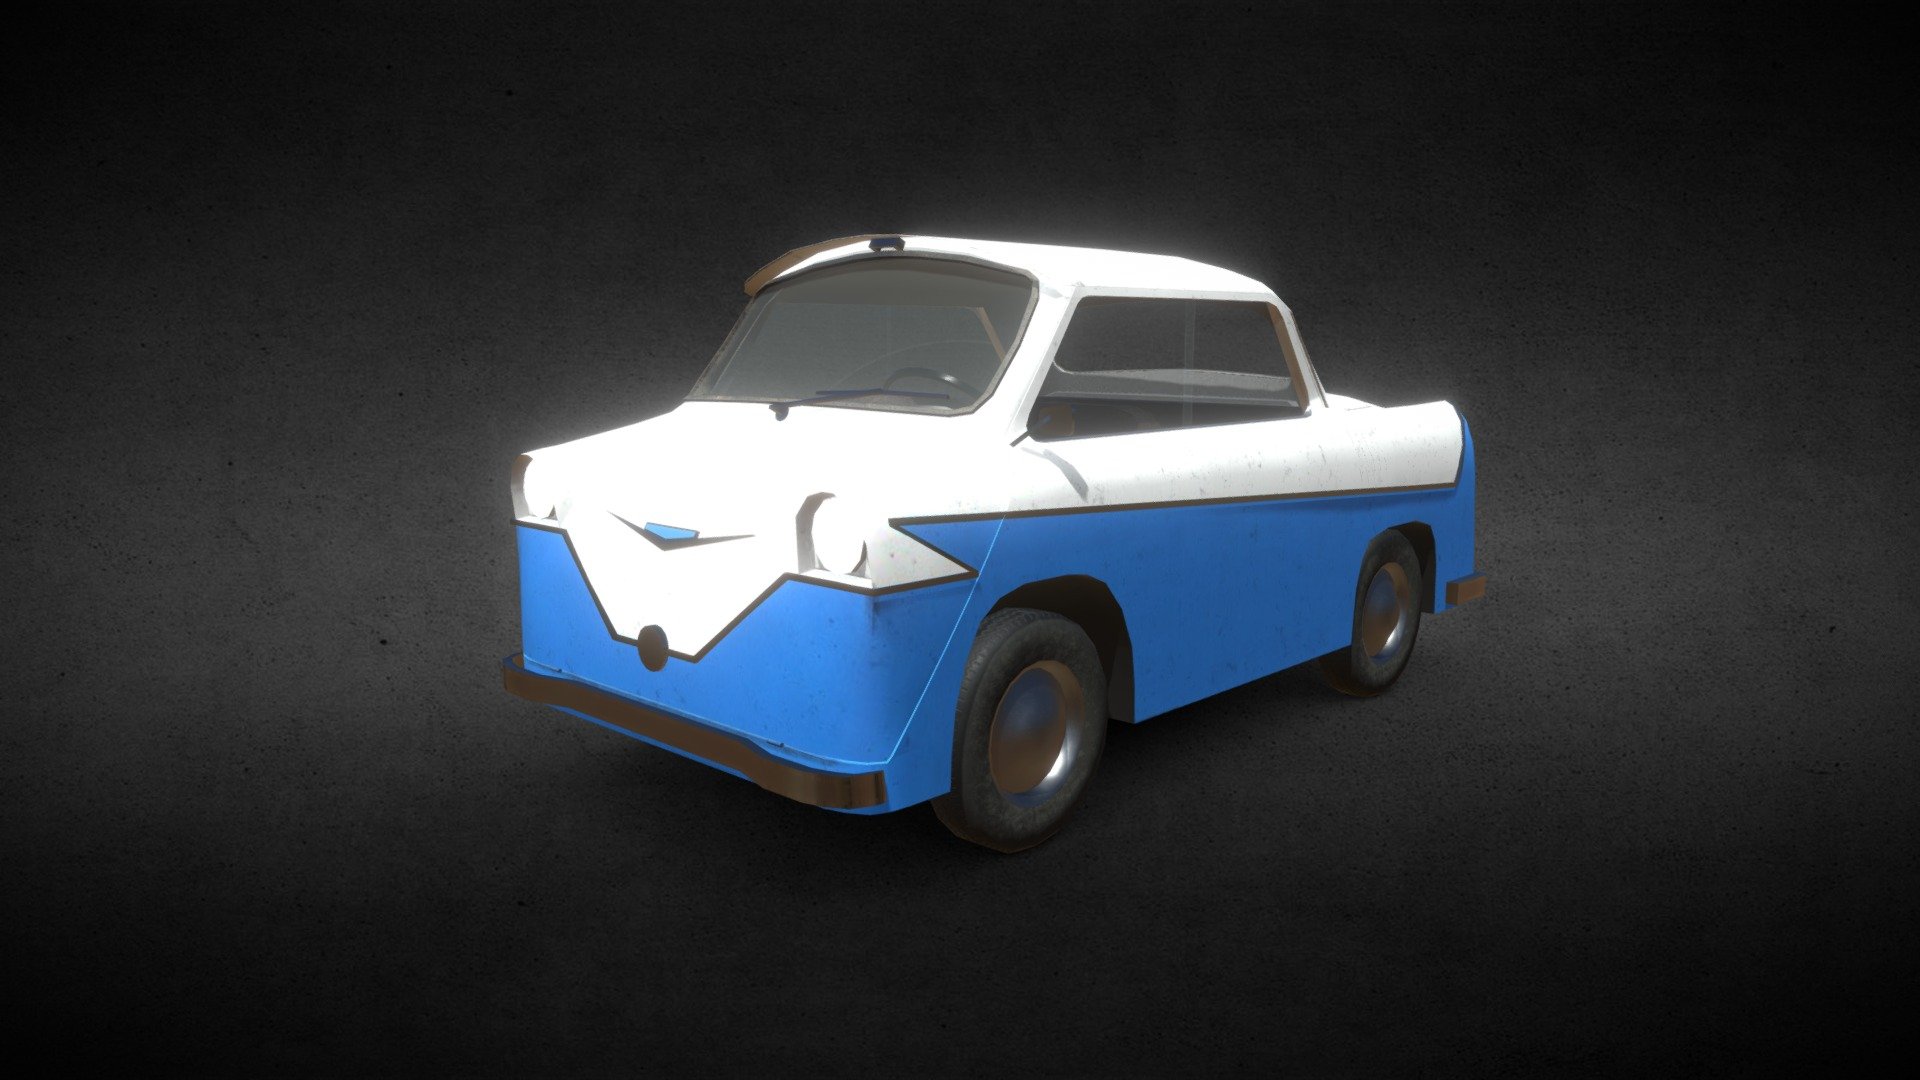 The Smyk was a Polish microcar prototype designed in 1957. Its unique characteristic was that the door was located in the front of the car. 17 cars were build (some sources claim that 20 cars).

Modeled in blender 2.93.5 (I was helping myself with OBJ file found in Internet). Textured in Quixel Mixer.

I hope you'd like it :) - (Low-poly) SFM Smyk (1957) - 3D model by KrStolorz 3d model